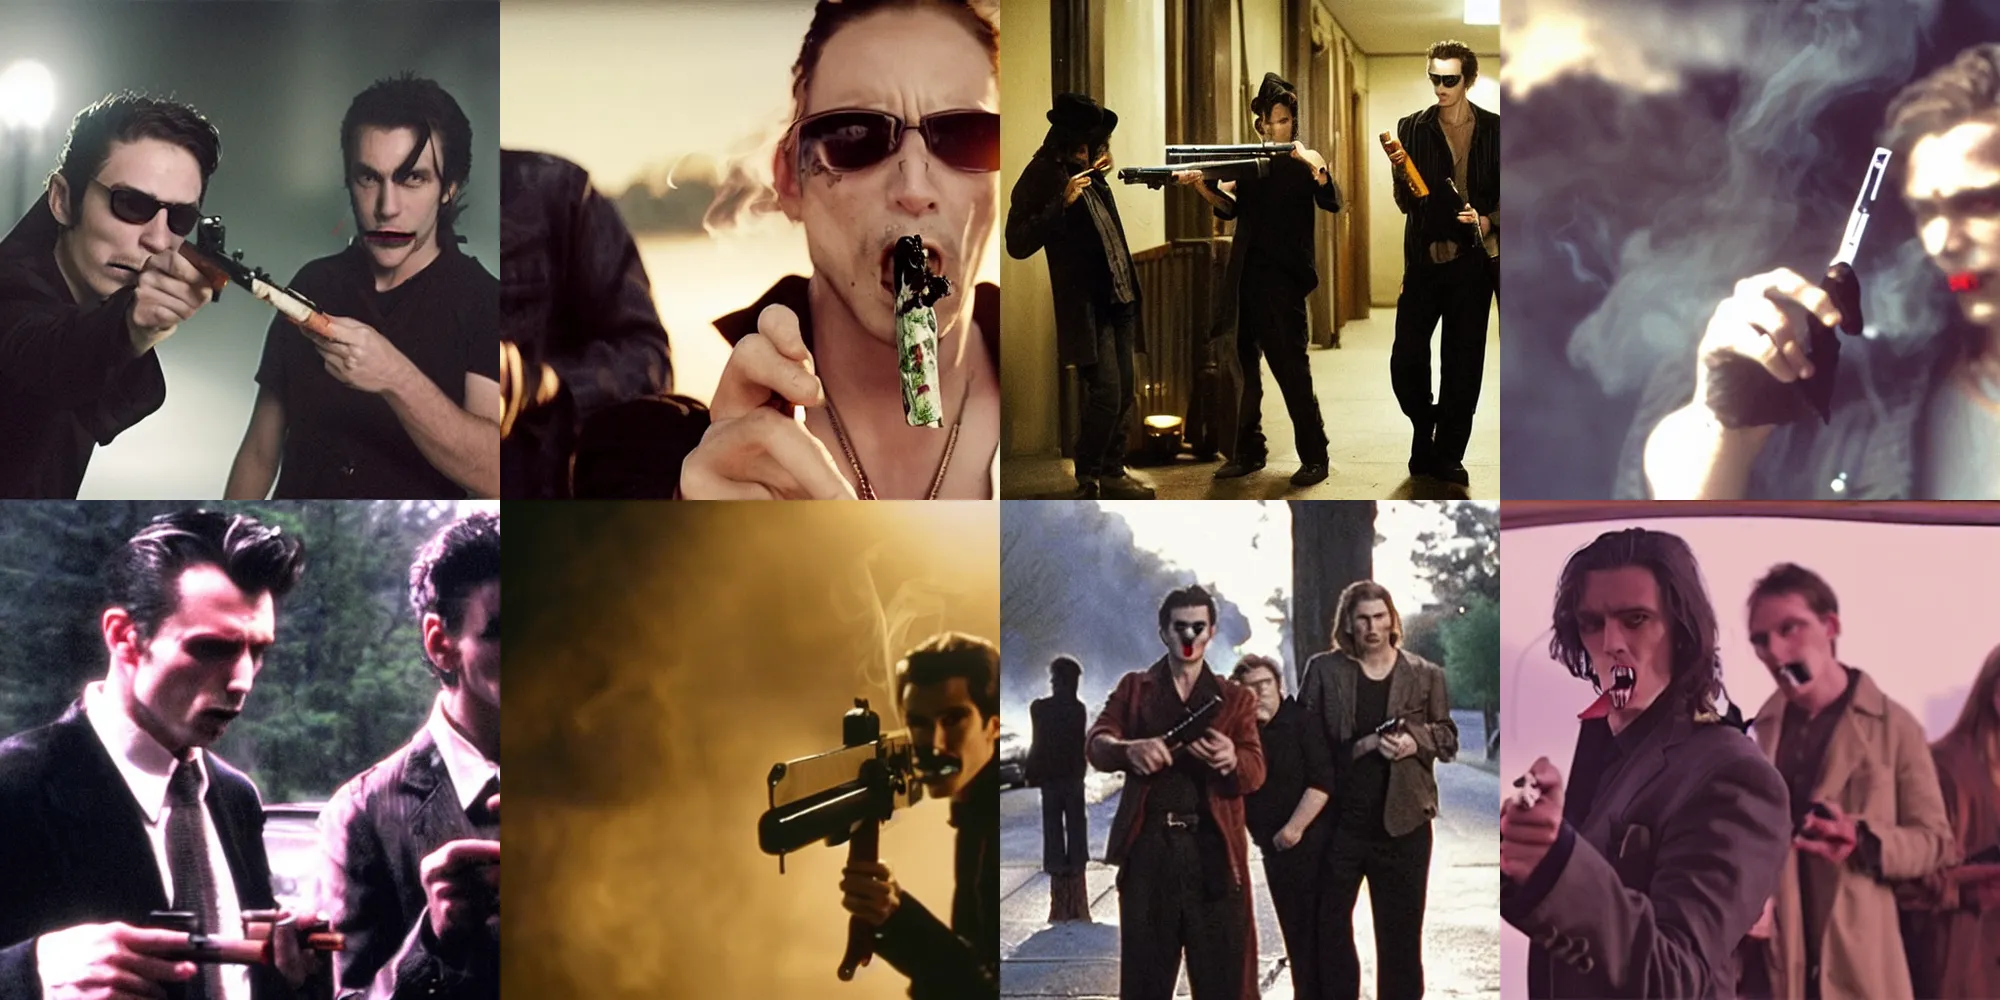 Prompt: Still from Cool Vampires Holding Guns Smoking Cigarettes Movie, well lit, high budget, heavily downvoted